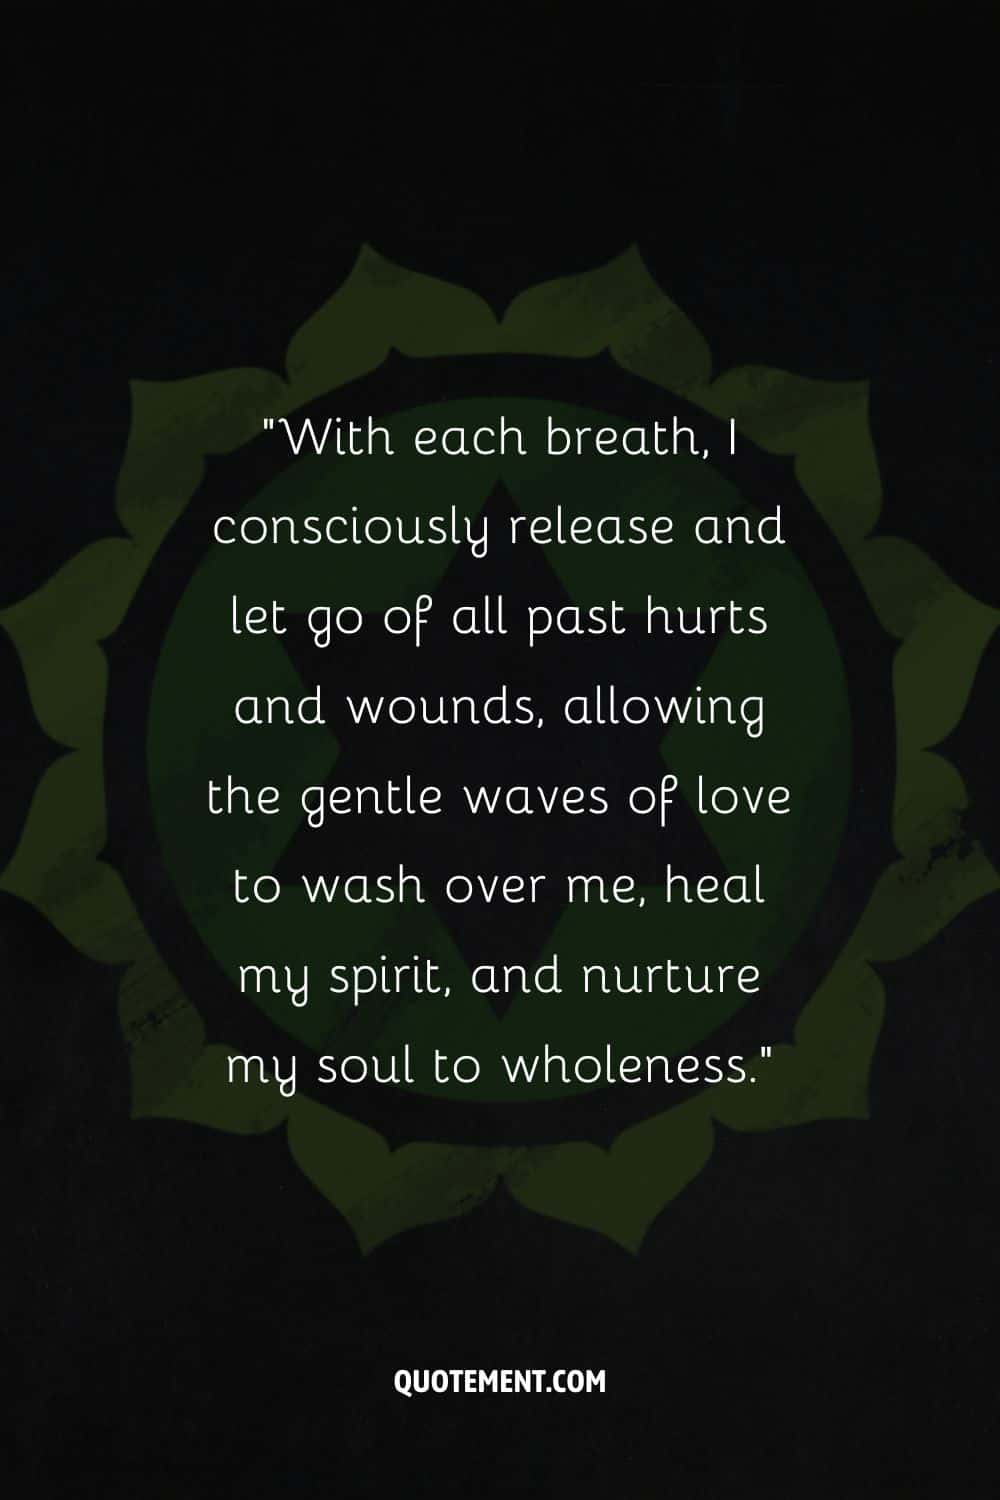 With each breath, I consciously release and let go of all past hurts and wounds,